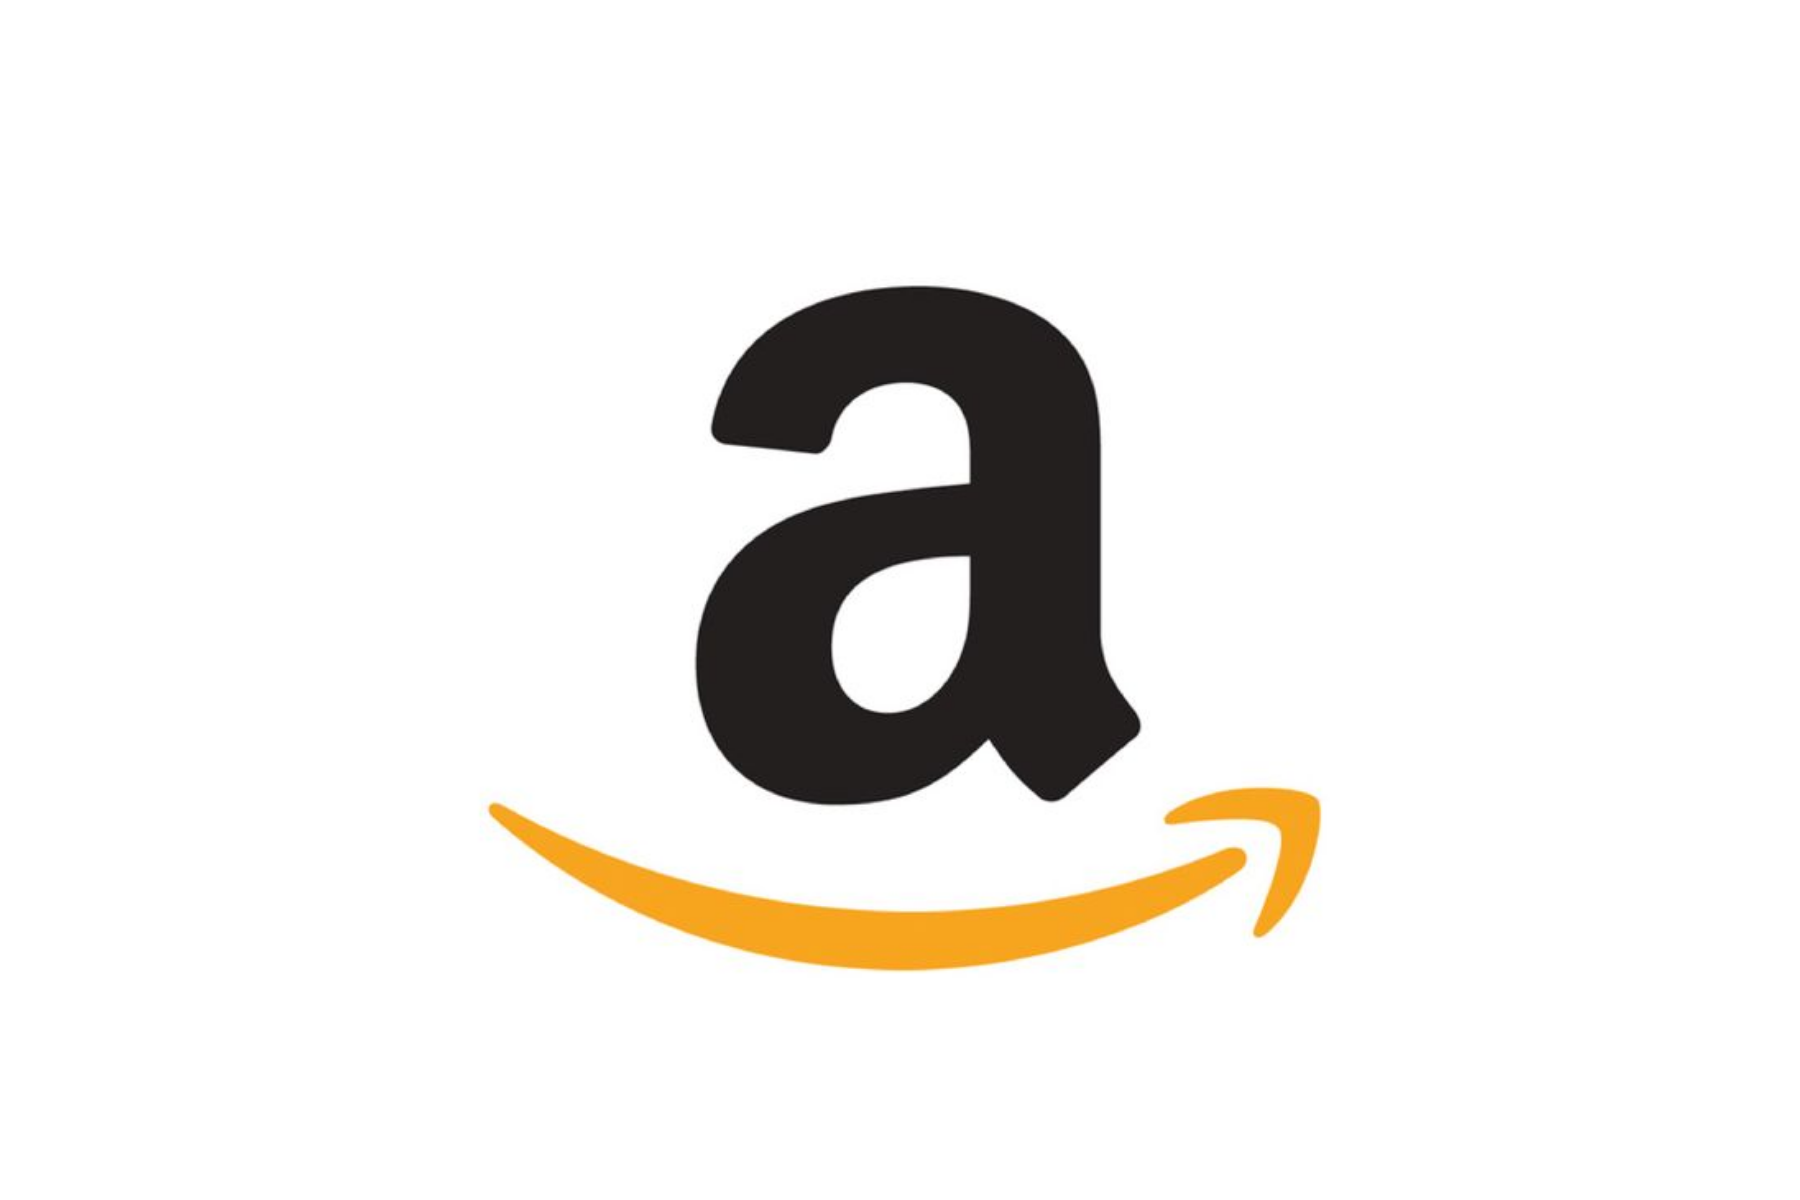 Amazon's logo is a small letter 'a' with a yellow arrow underneath